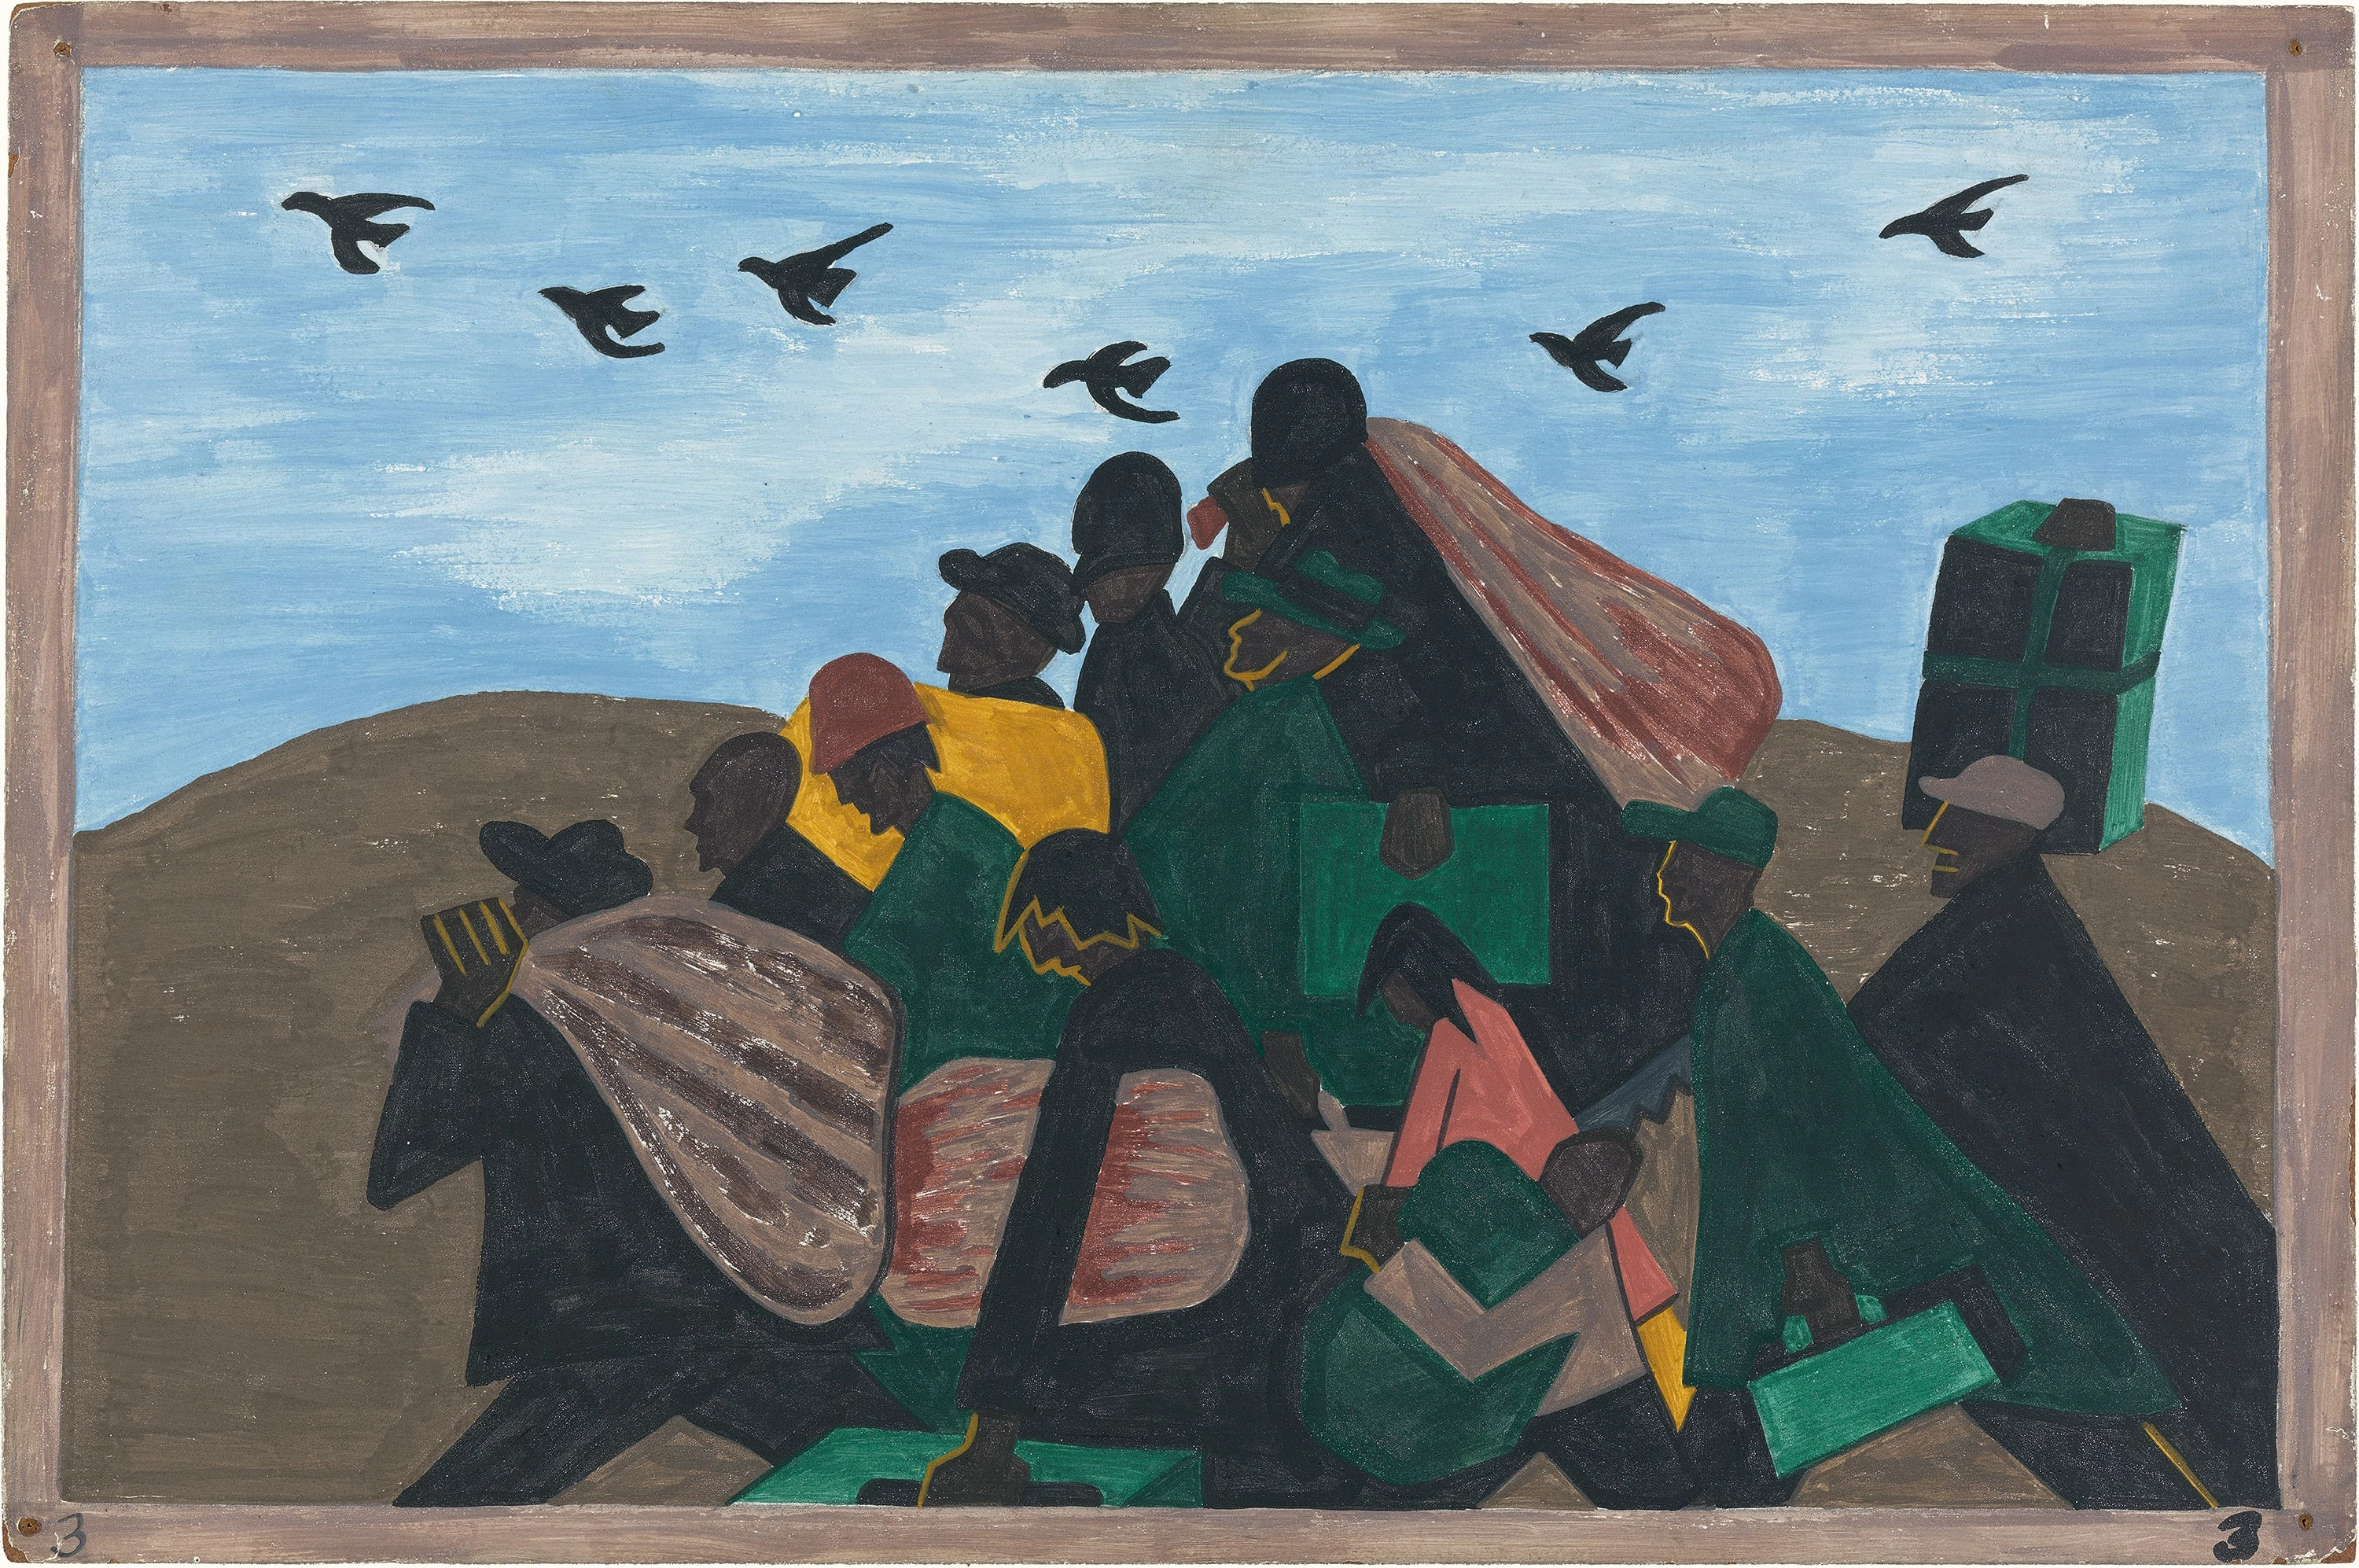 Migration Series No.3:  From every southern town migrants left by the hundreds to travel north, Jacob Lawrence